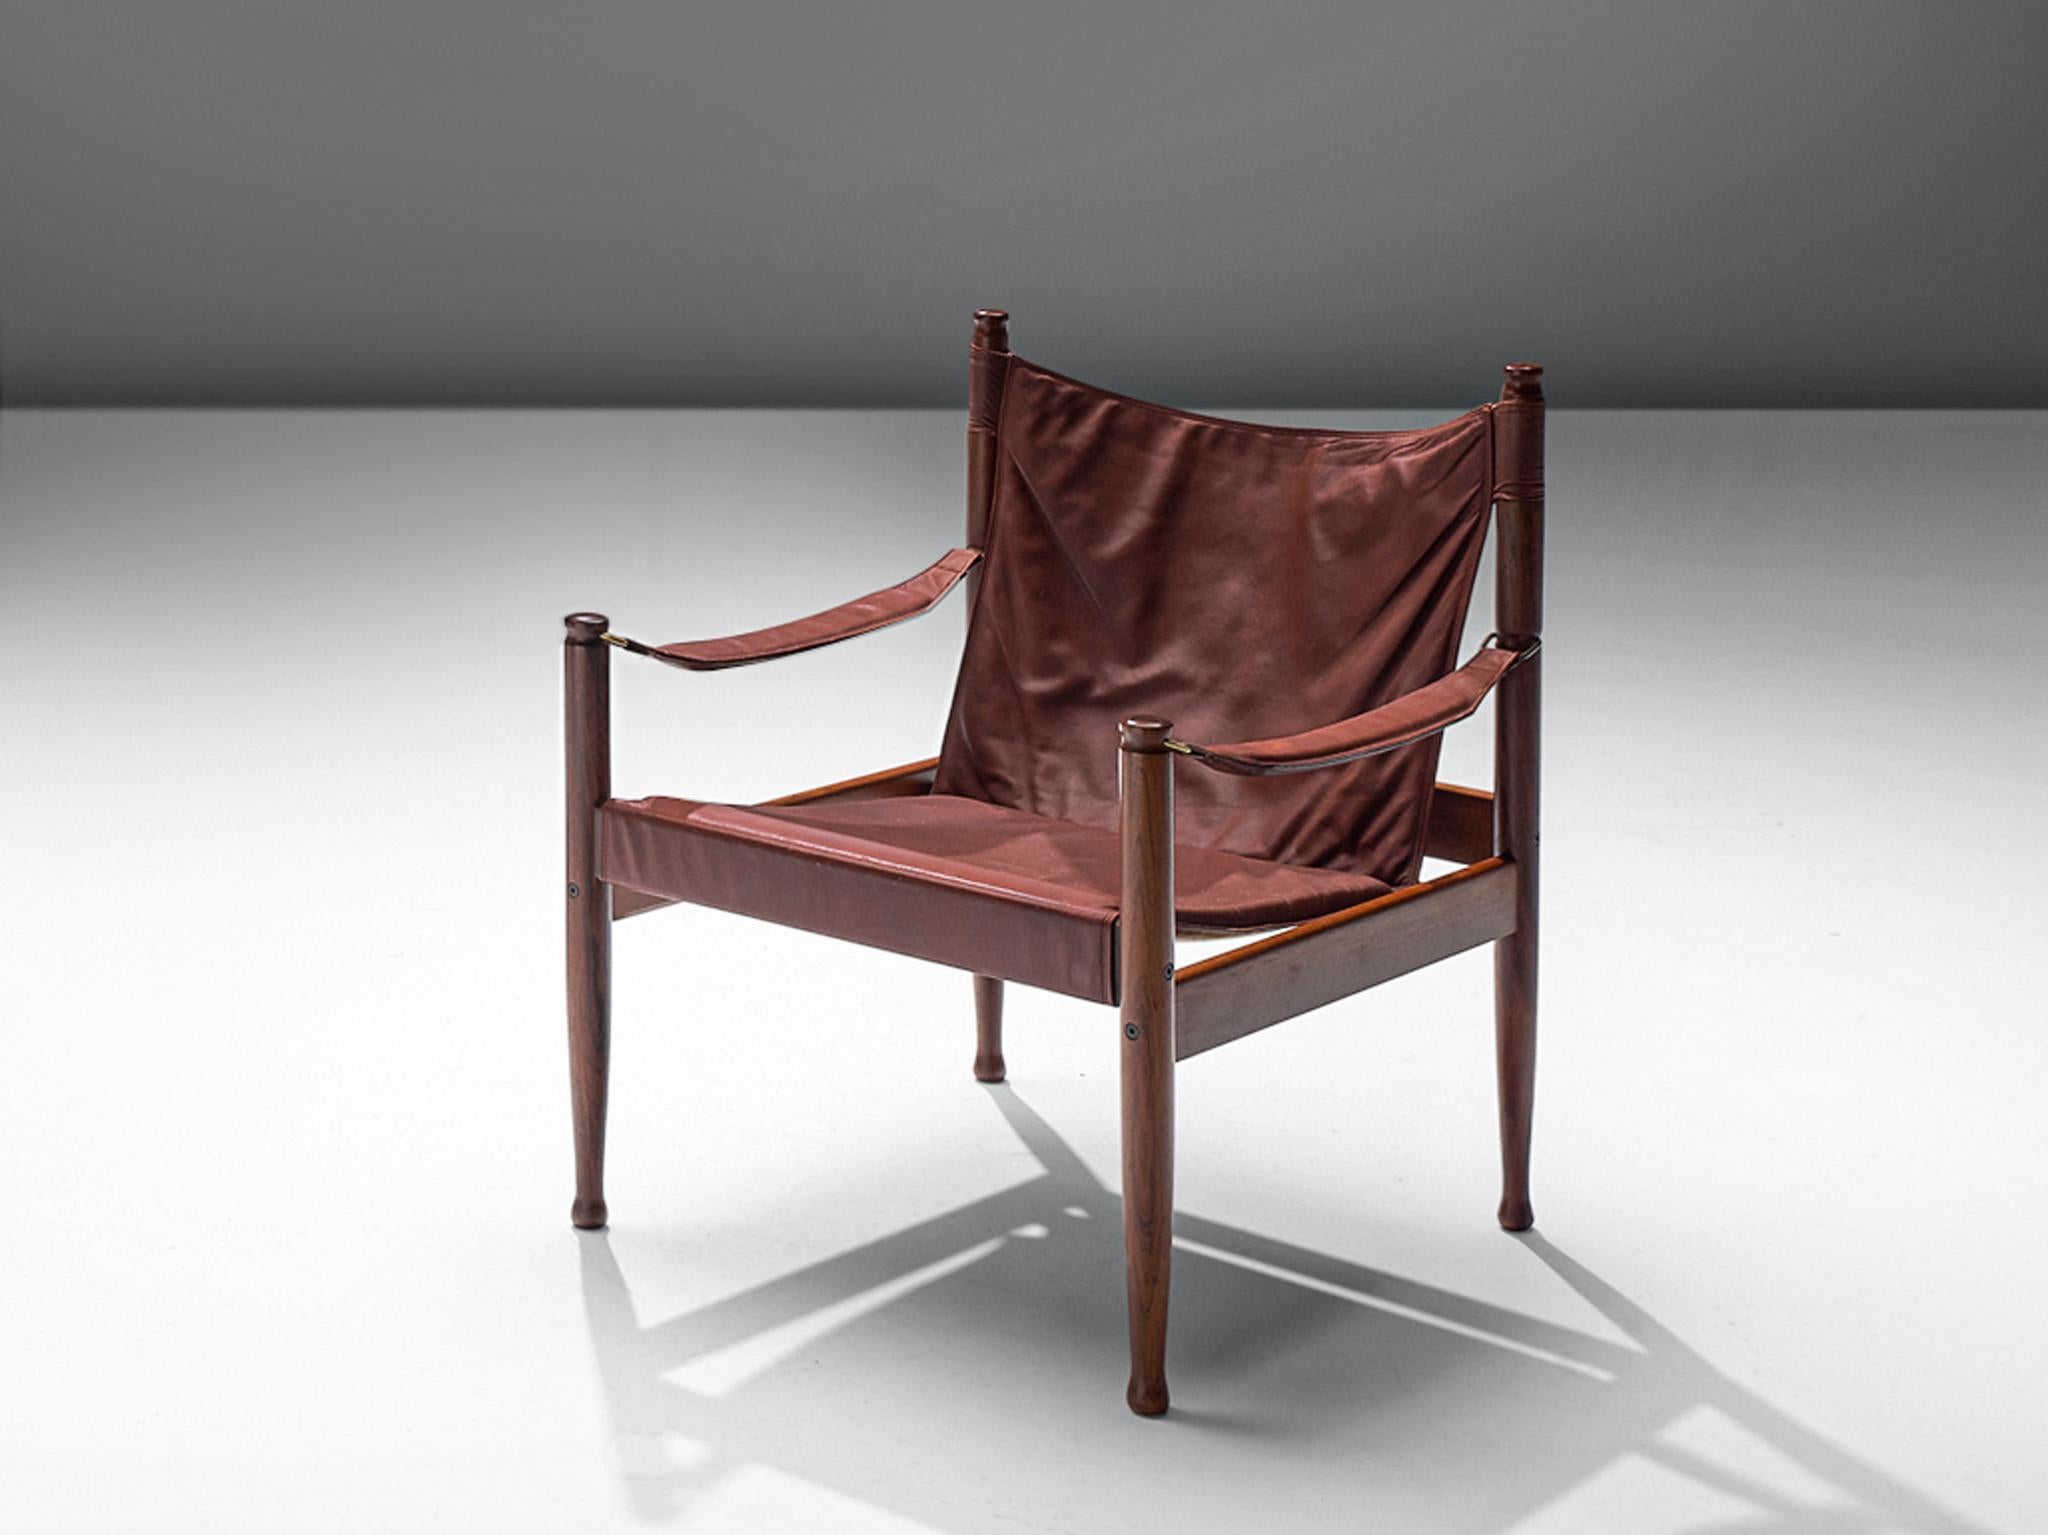 Erik Wørts for Niels Eilsersen, armchair, oak and leather, Denmark, 1960s, later production. 

This sturdy lounge chair with refined details is designed by Danish designer Erik Wørts. The safari easy chair has a strong expression due to the